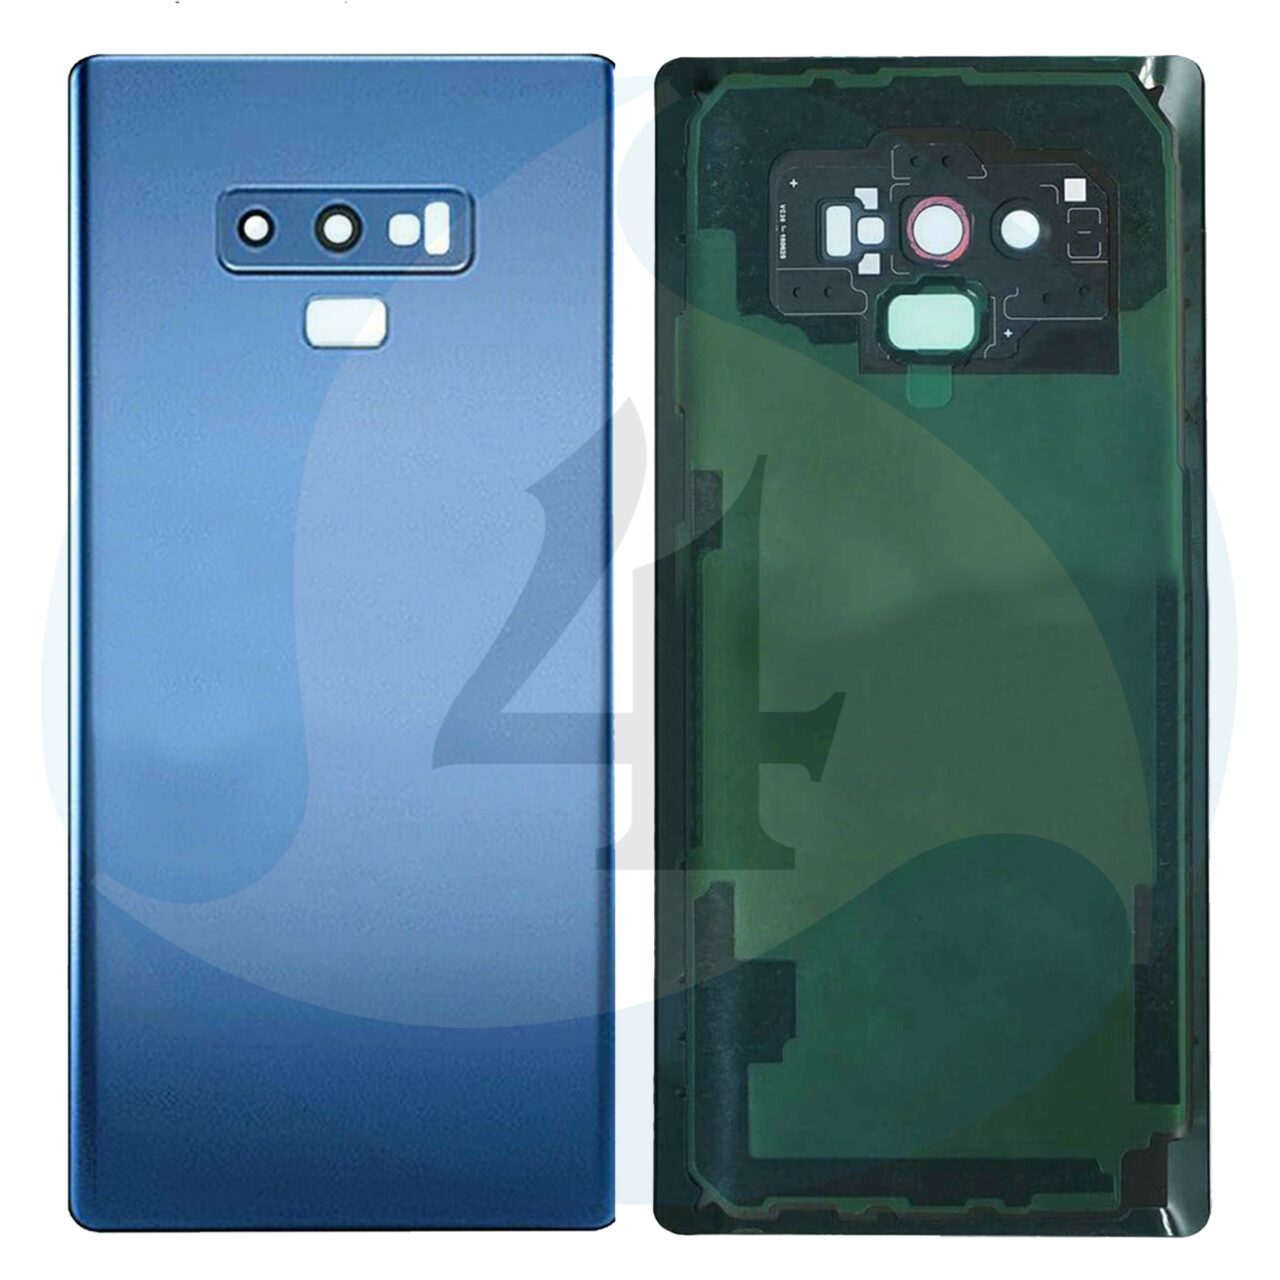 Replacement for samsung galaxy note 9 sm n960 back cover blue